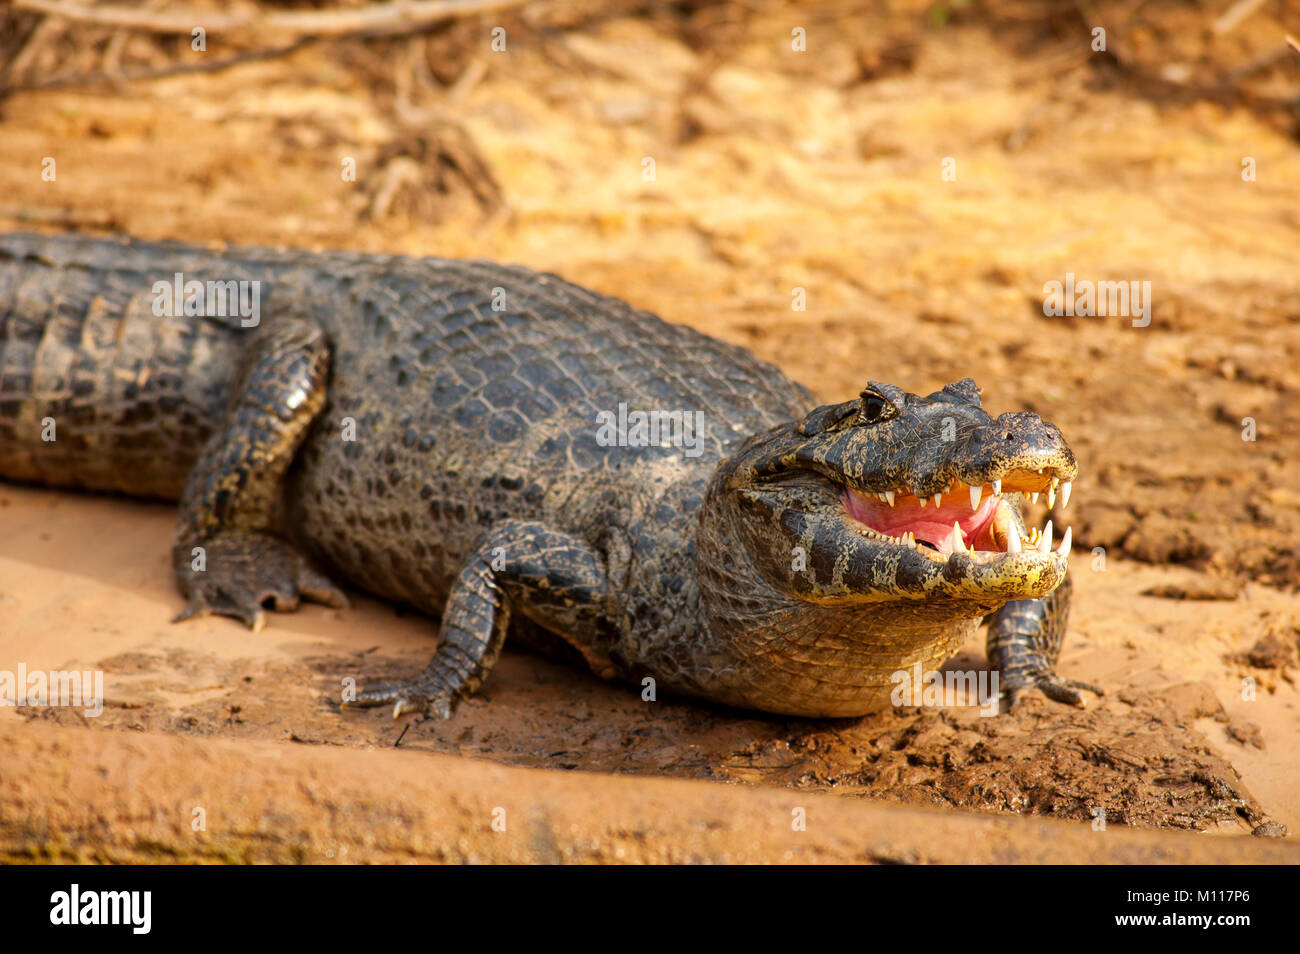 Alligator at the banks of Tres Irmãos river, Pantanal of Mato Grosso, Brazil Stock Photo